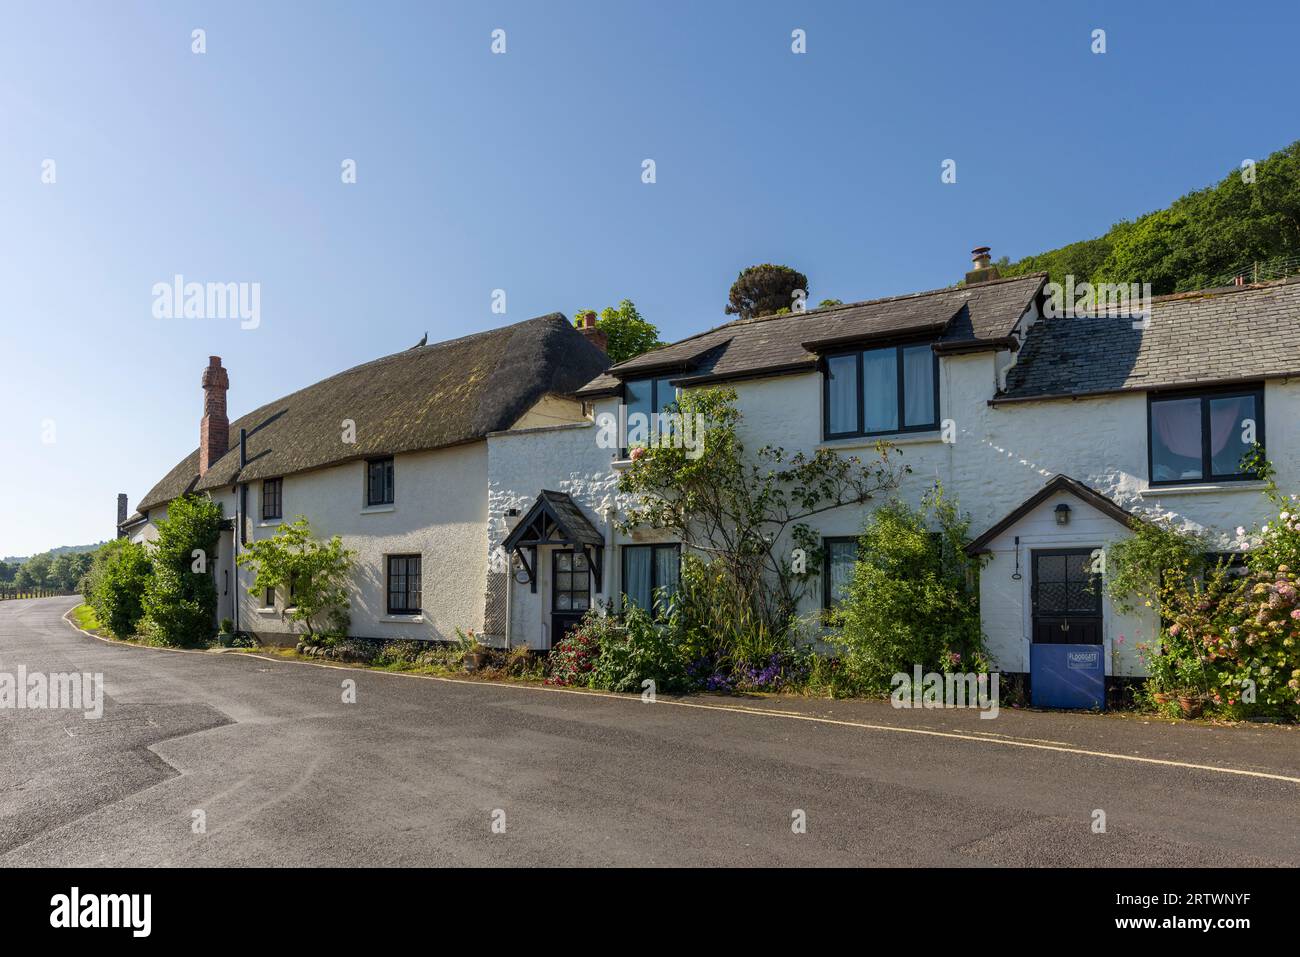 Cottages in Porlock Weir on the Exmoor National Park coast, Somerset, England. Stock Photo